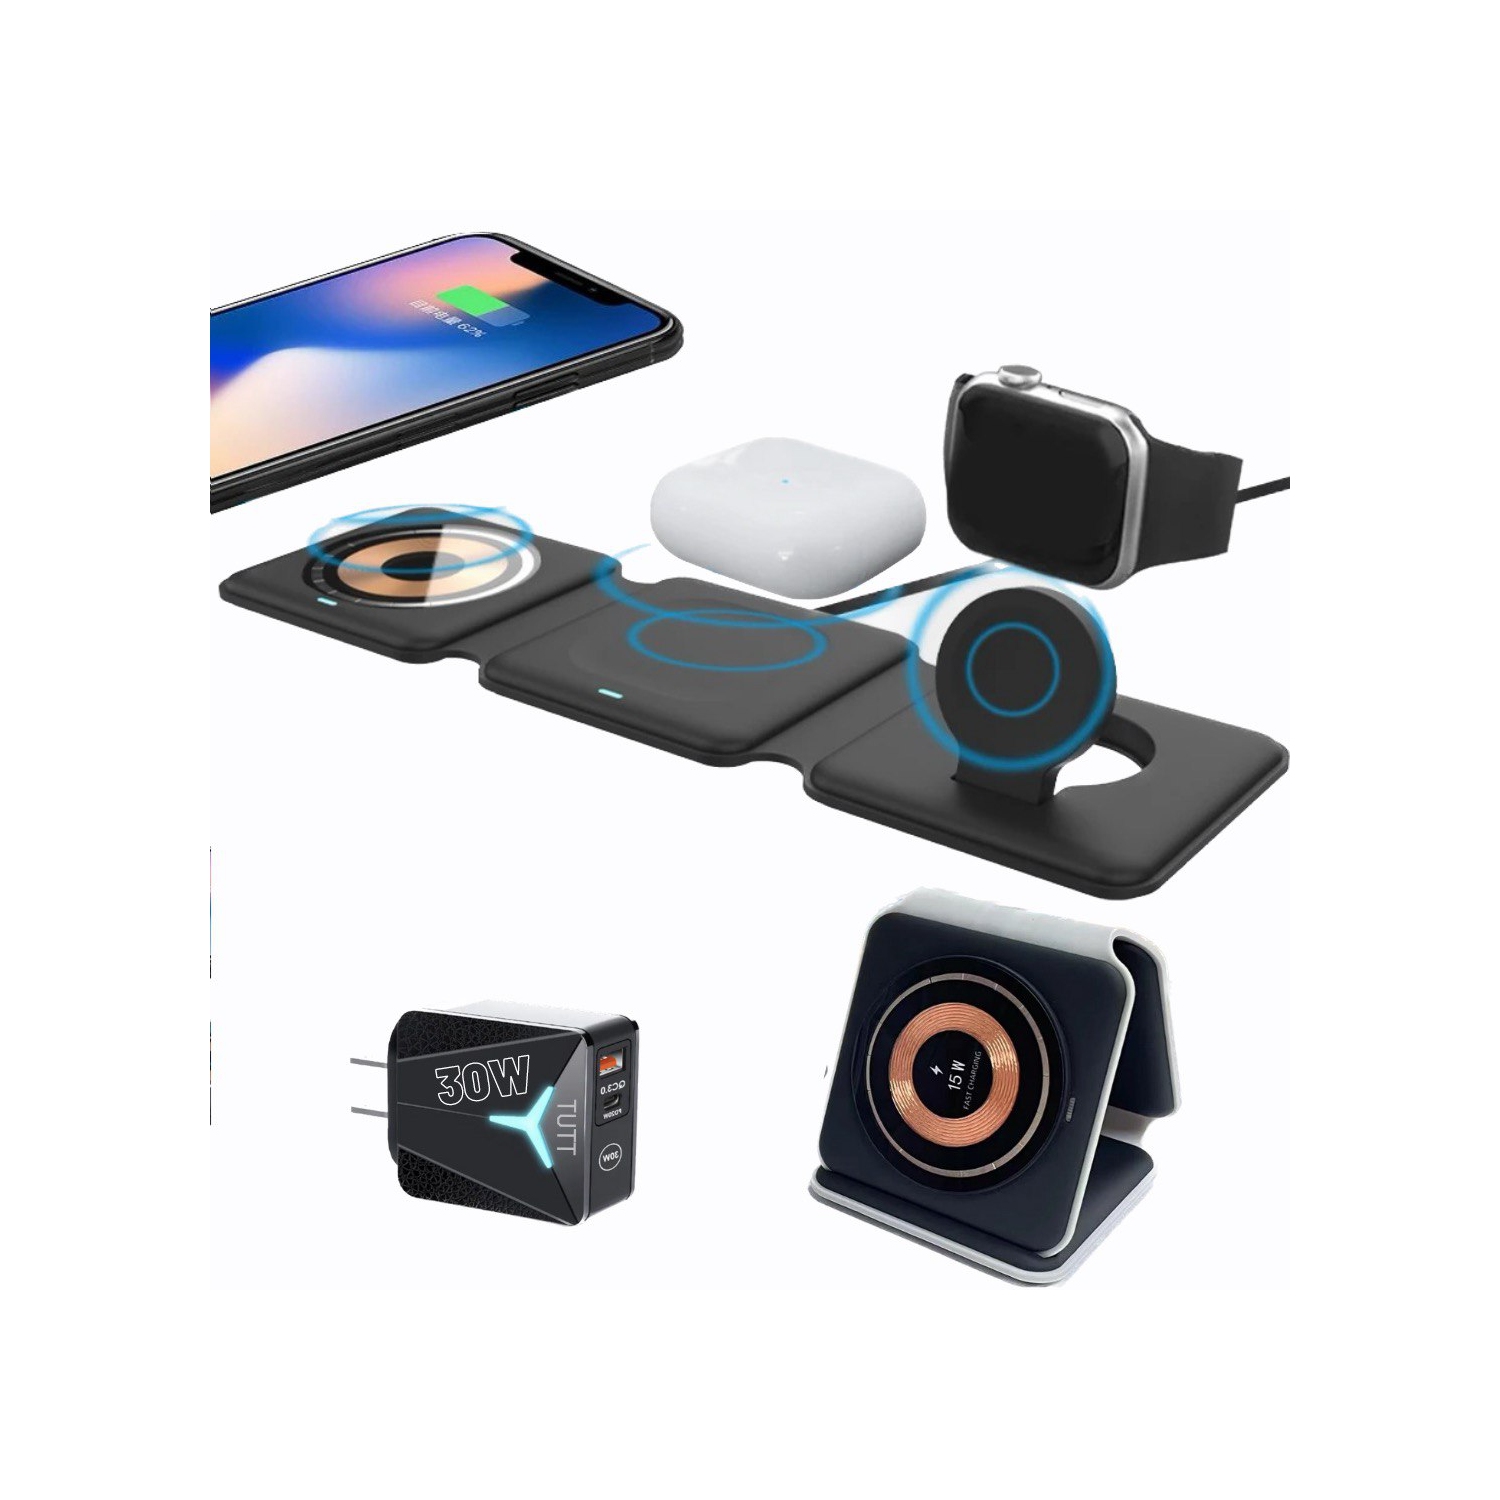 TUTT 3 in 1 Wireless Magnetic Foldable Charger Station Compatible with iPhone AirPods iWatch Galaxy etc + 30W Adapter Included | Support de Station de Recharge sans fil